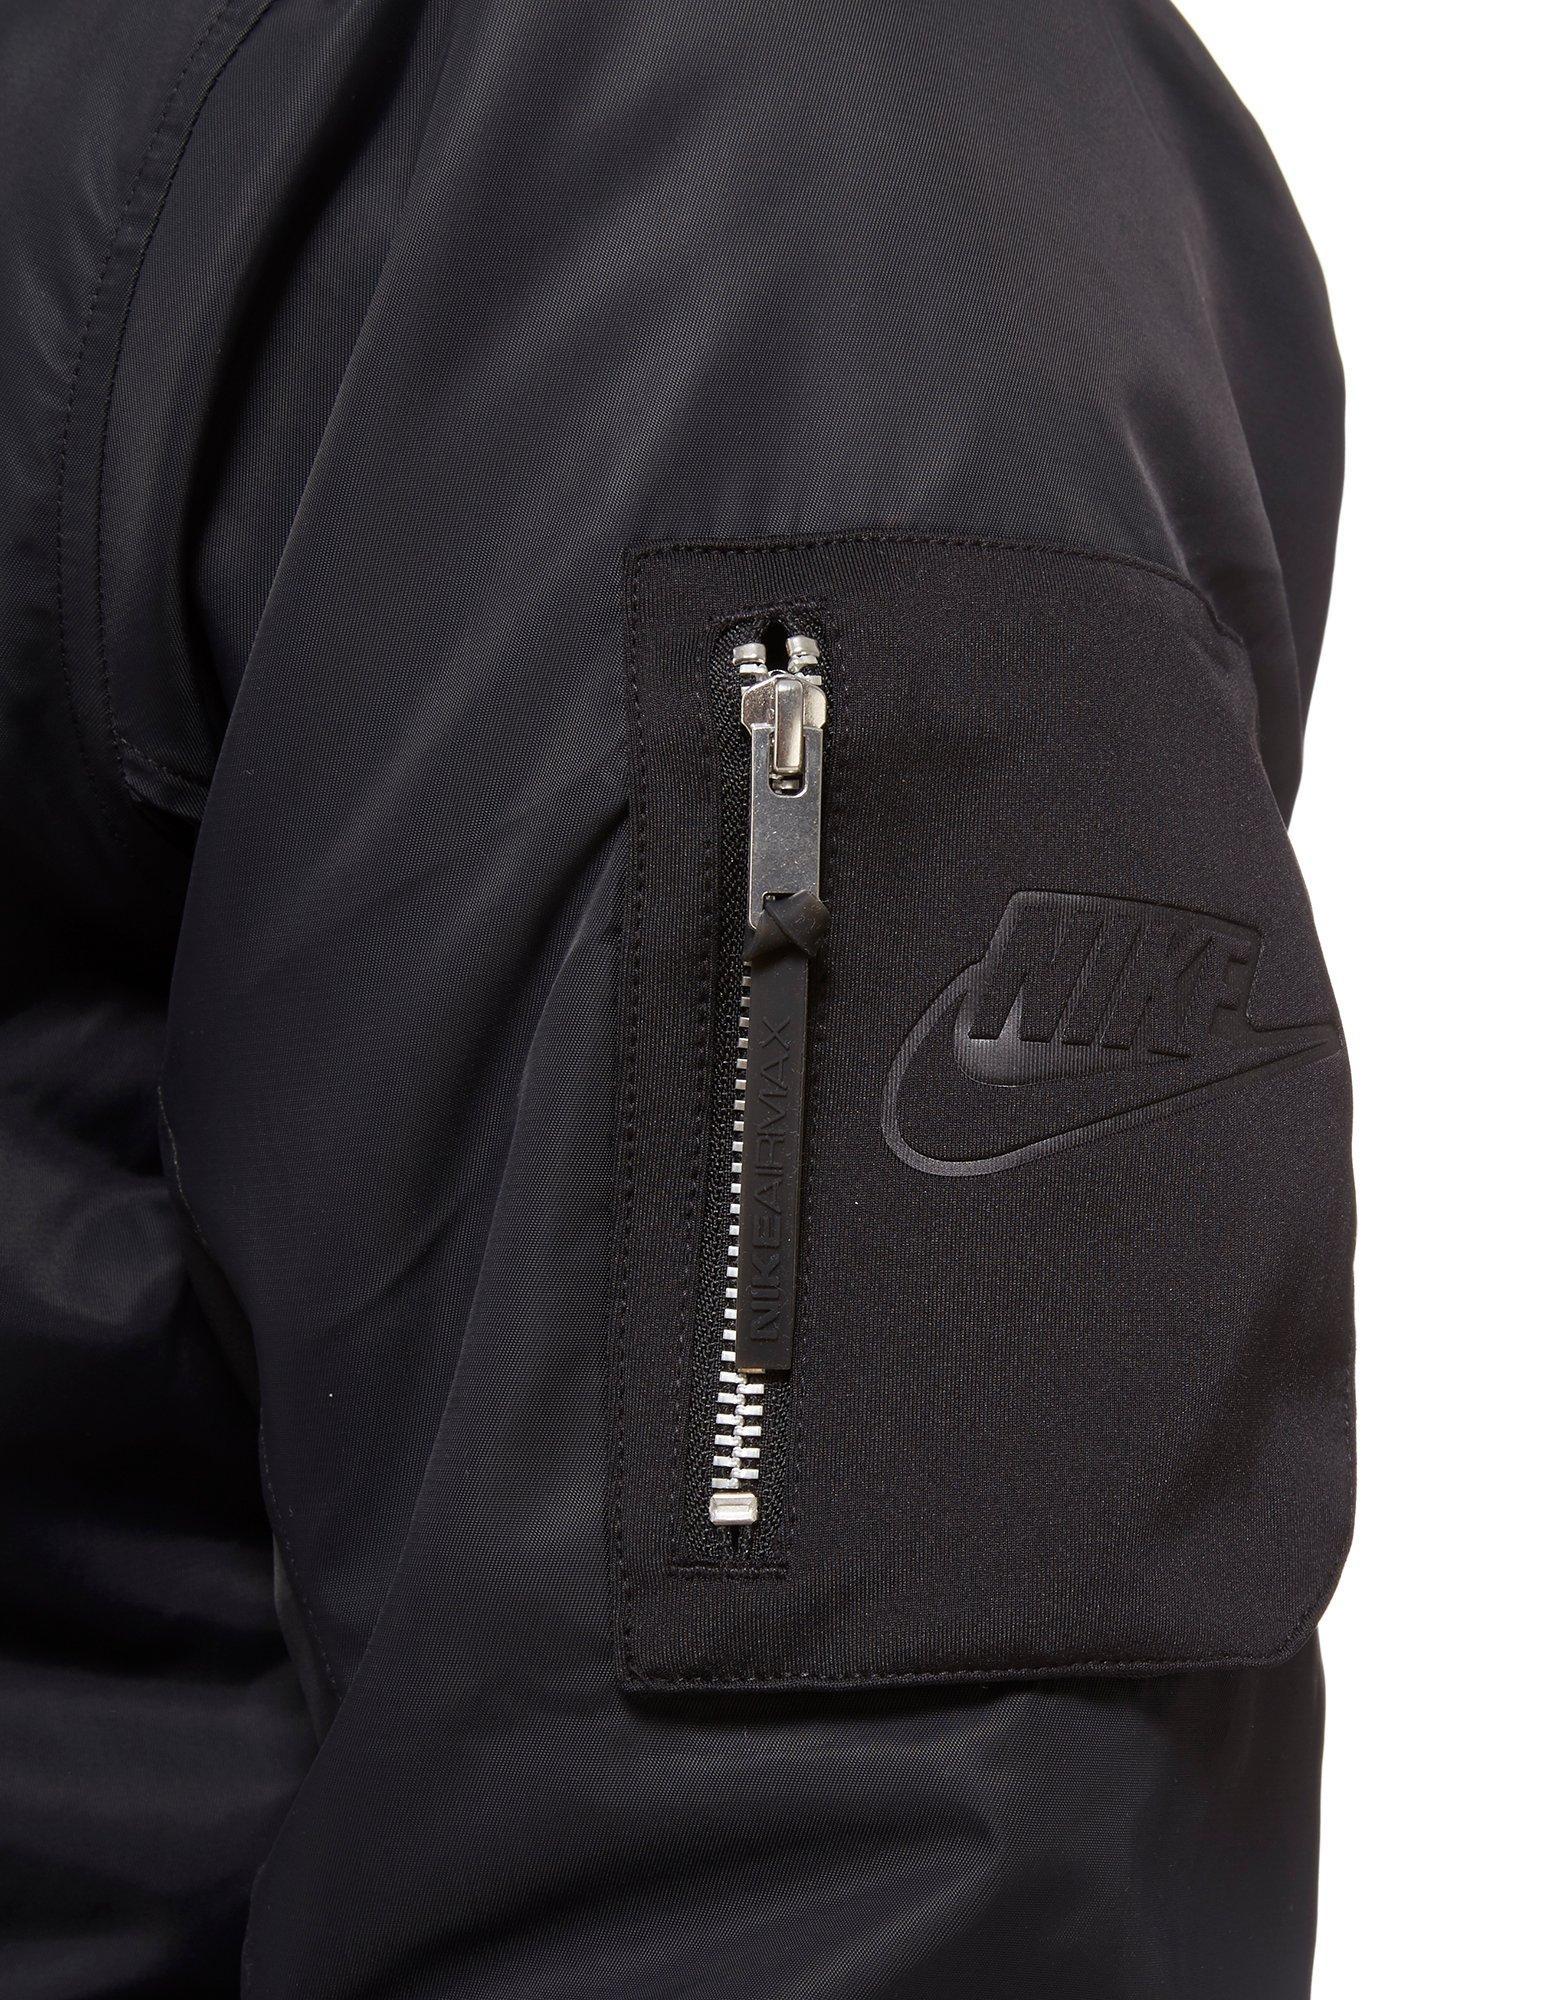 Nike Synthetic Air Max Woven Jacket in Black for Men - Lyst